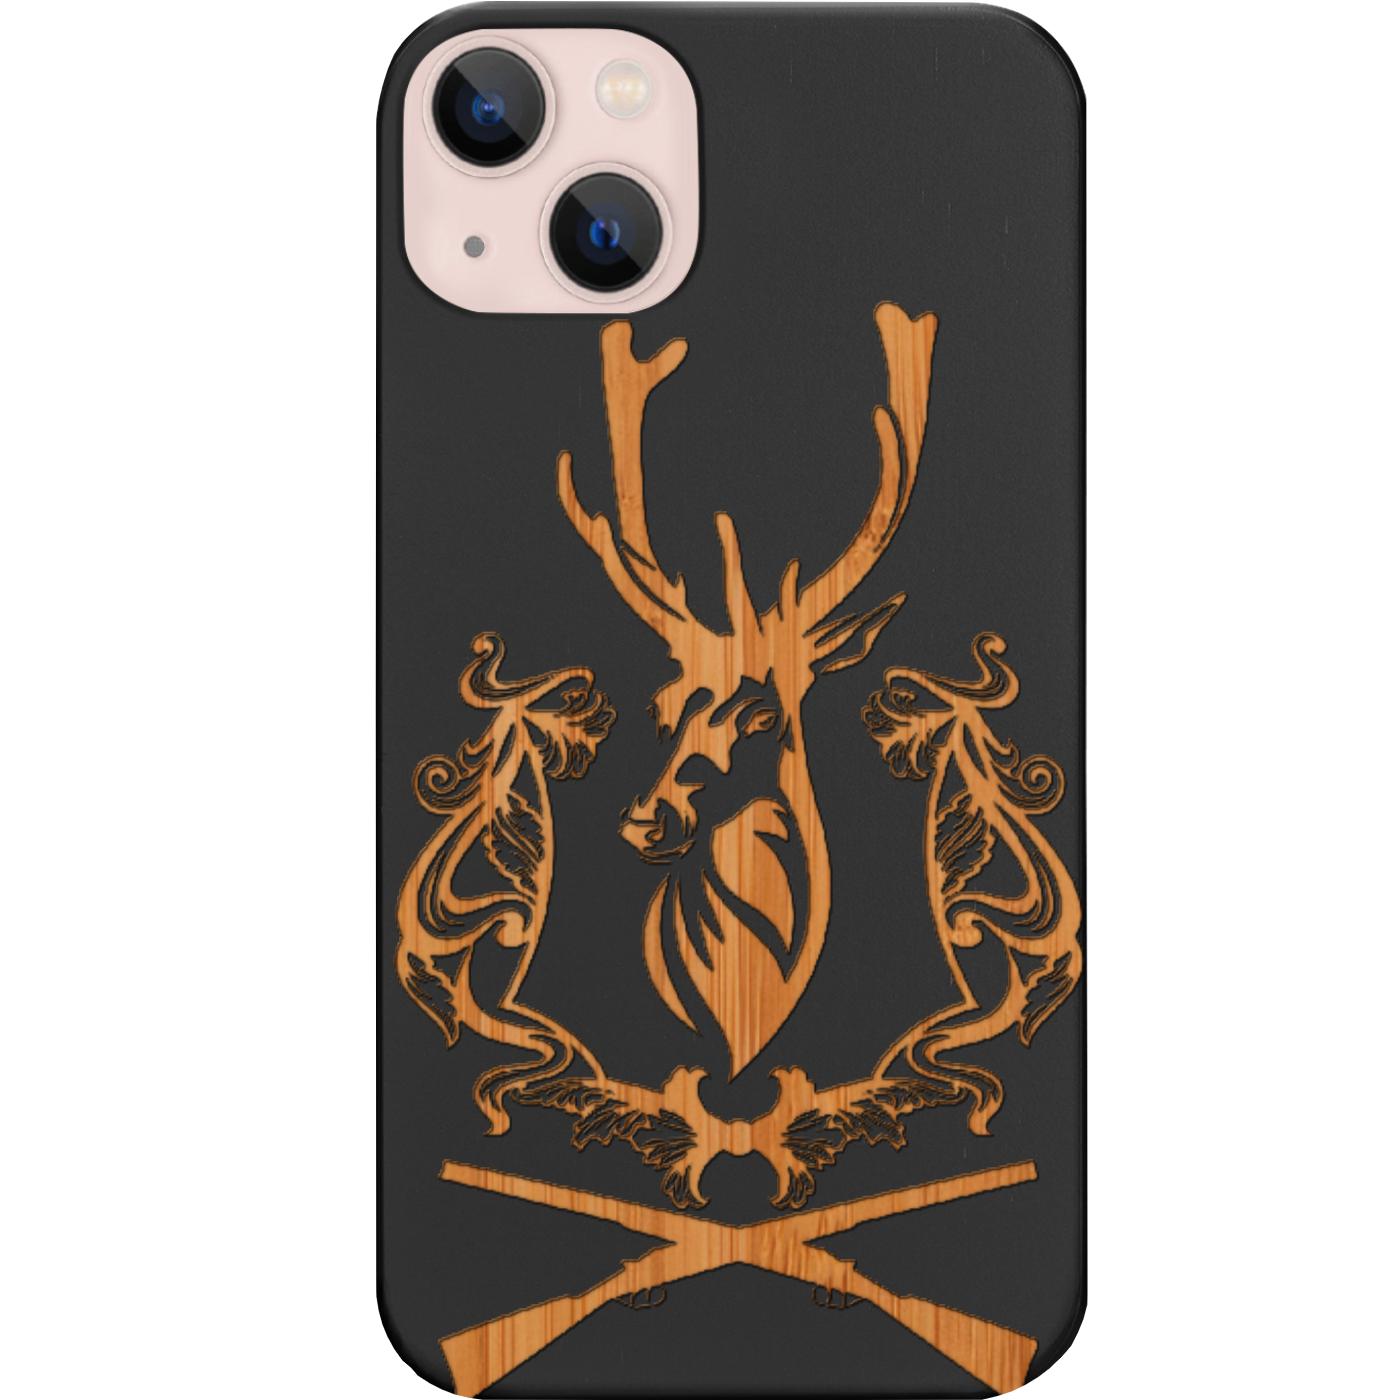 Deer with Rifles - Engraved Phone Case